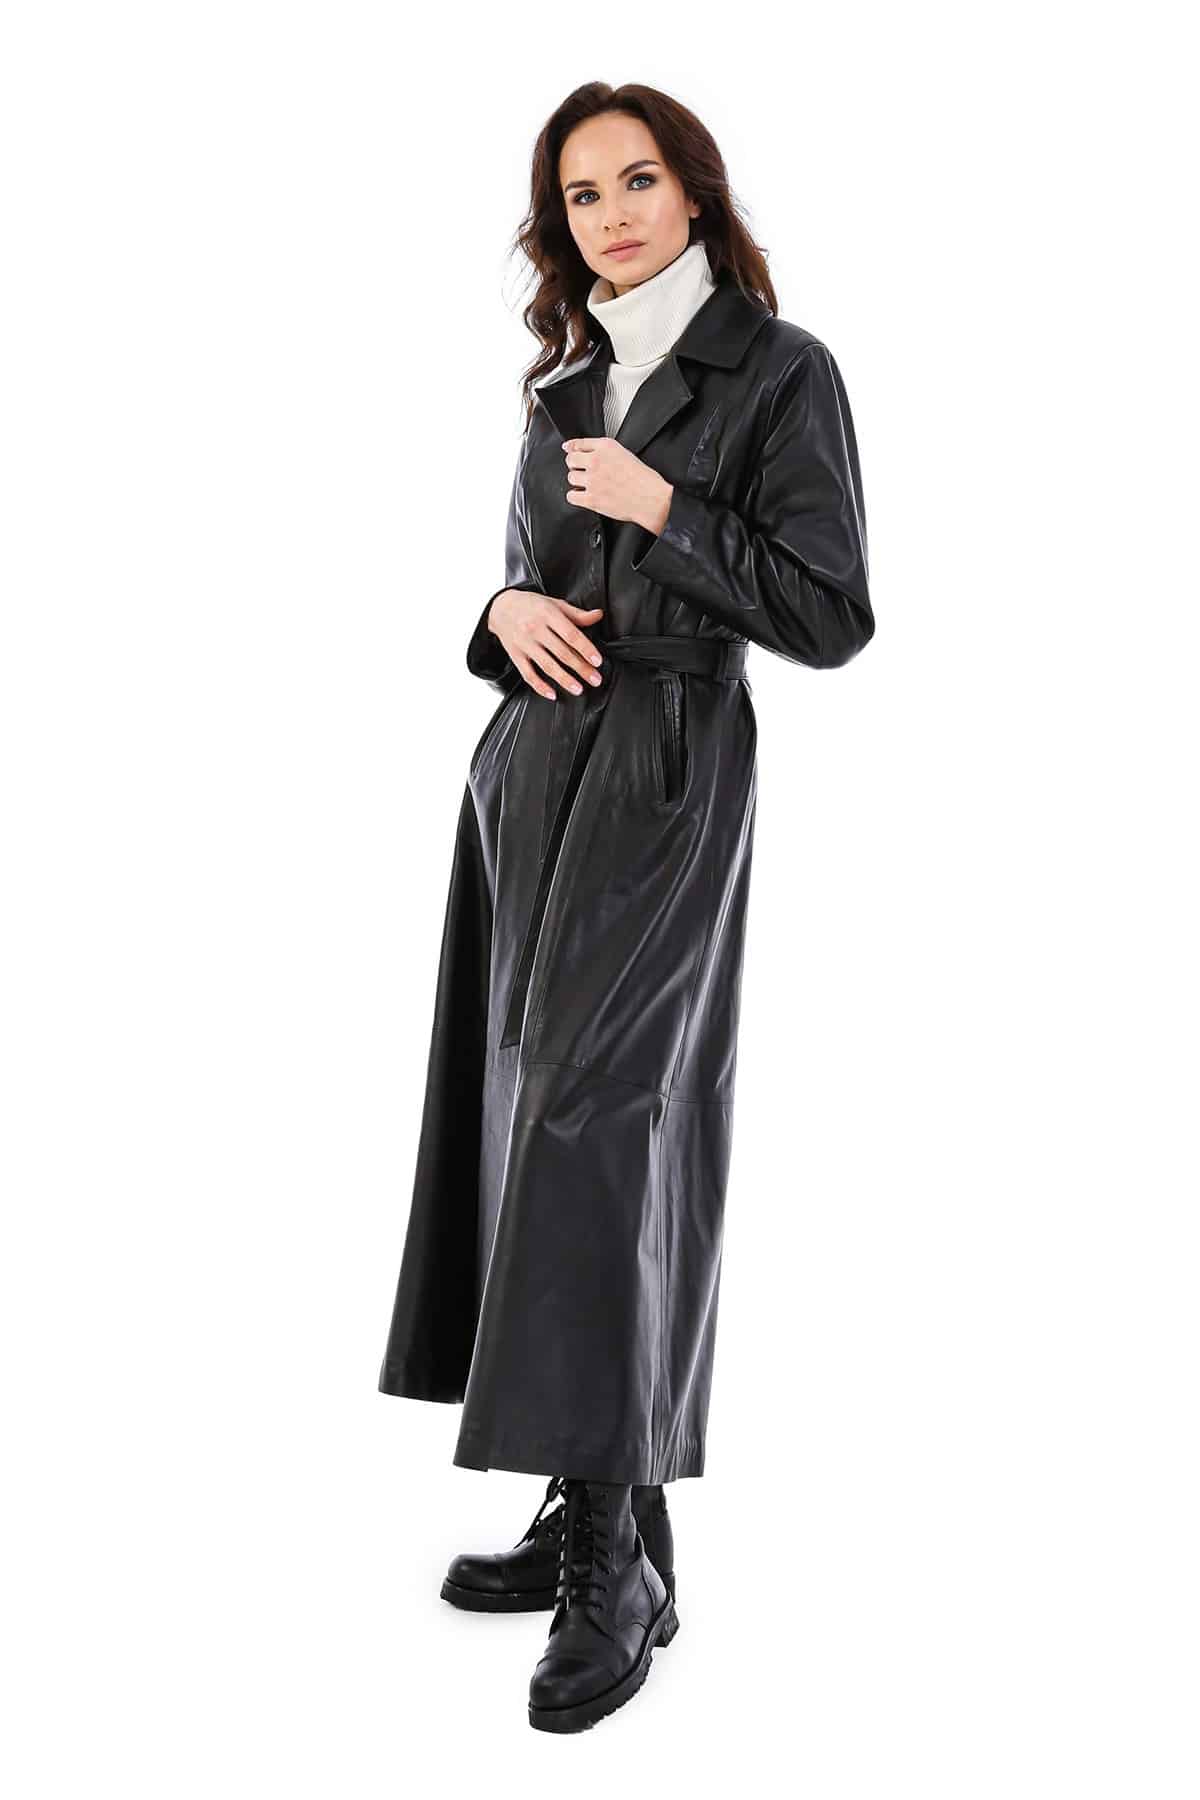 Alisa Women's 100 % Real Black Leather Trench Coat